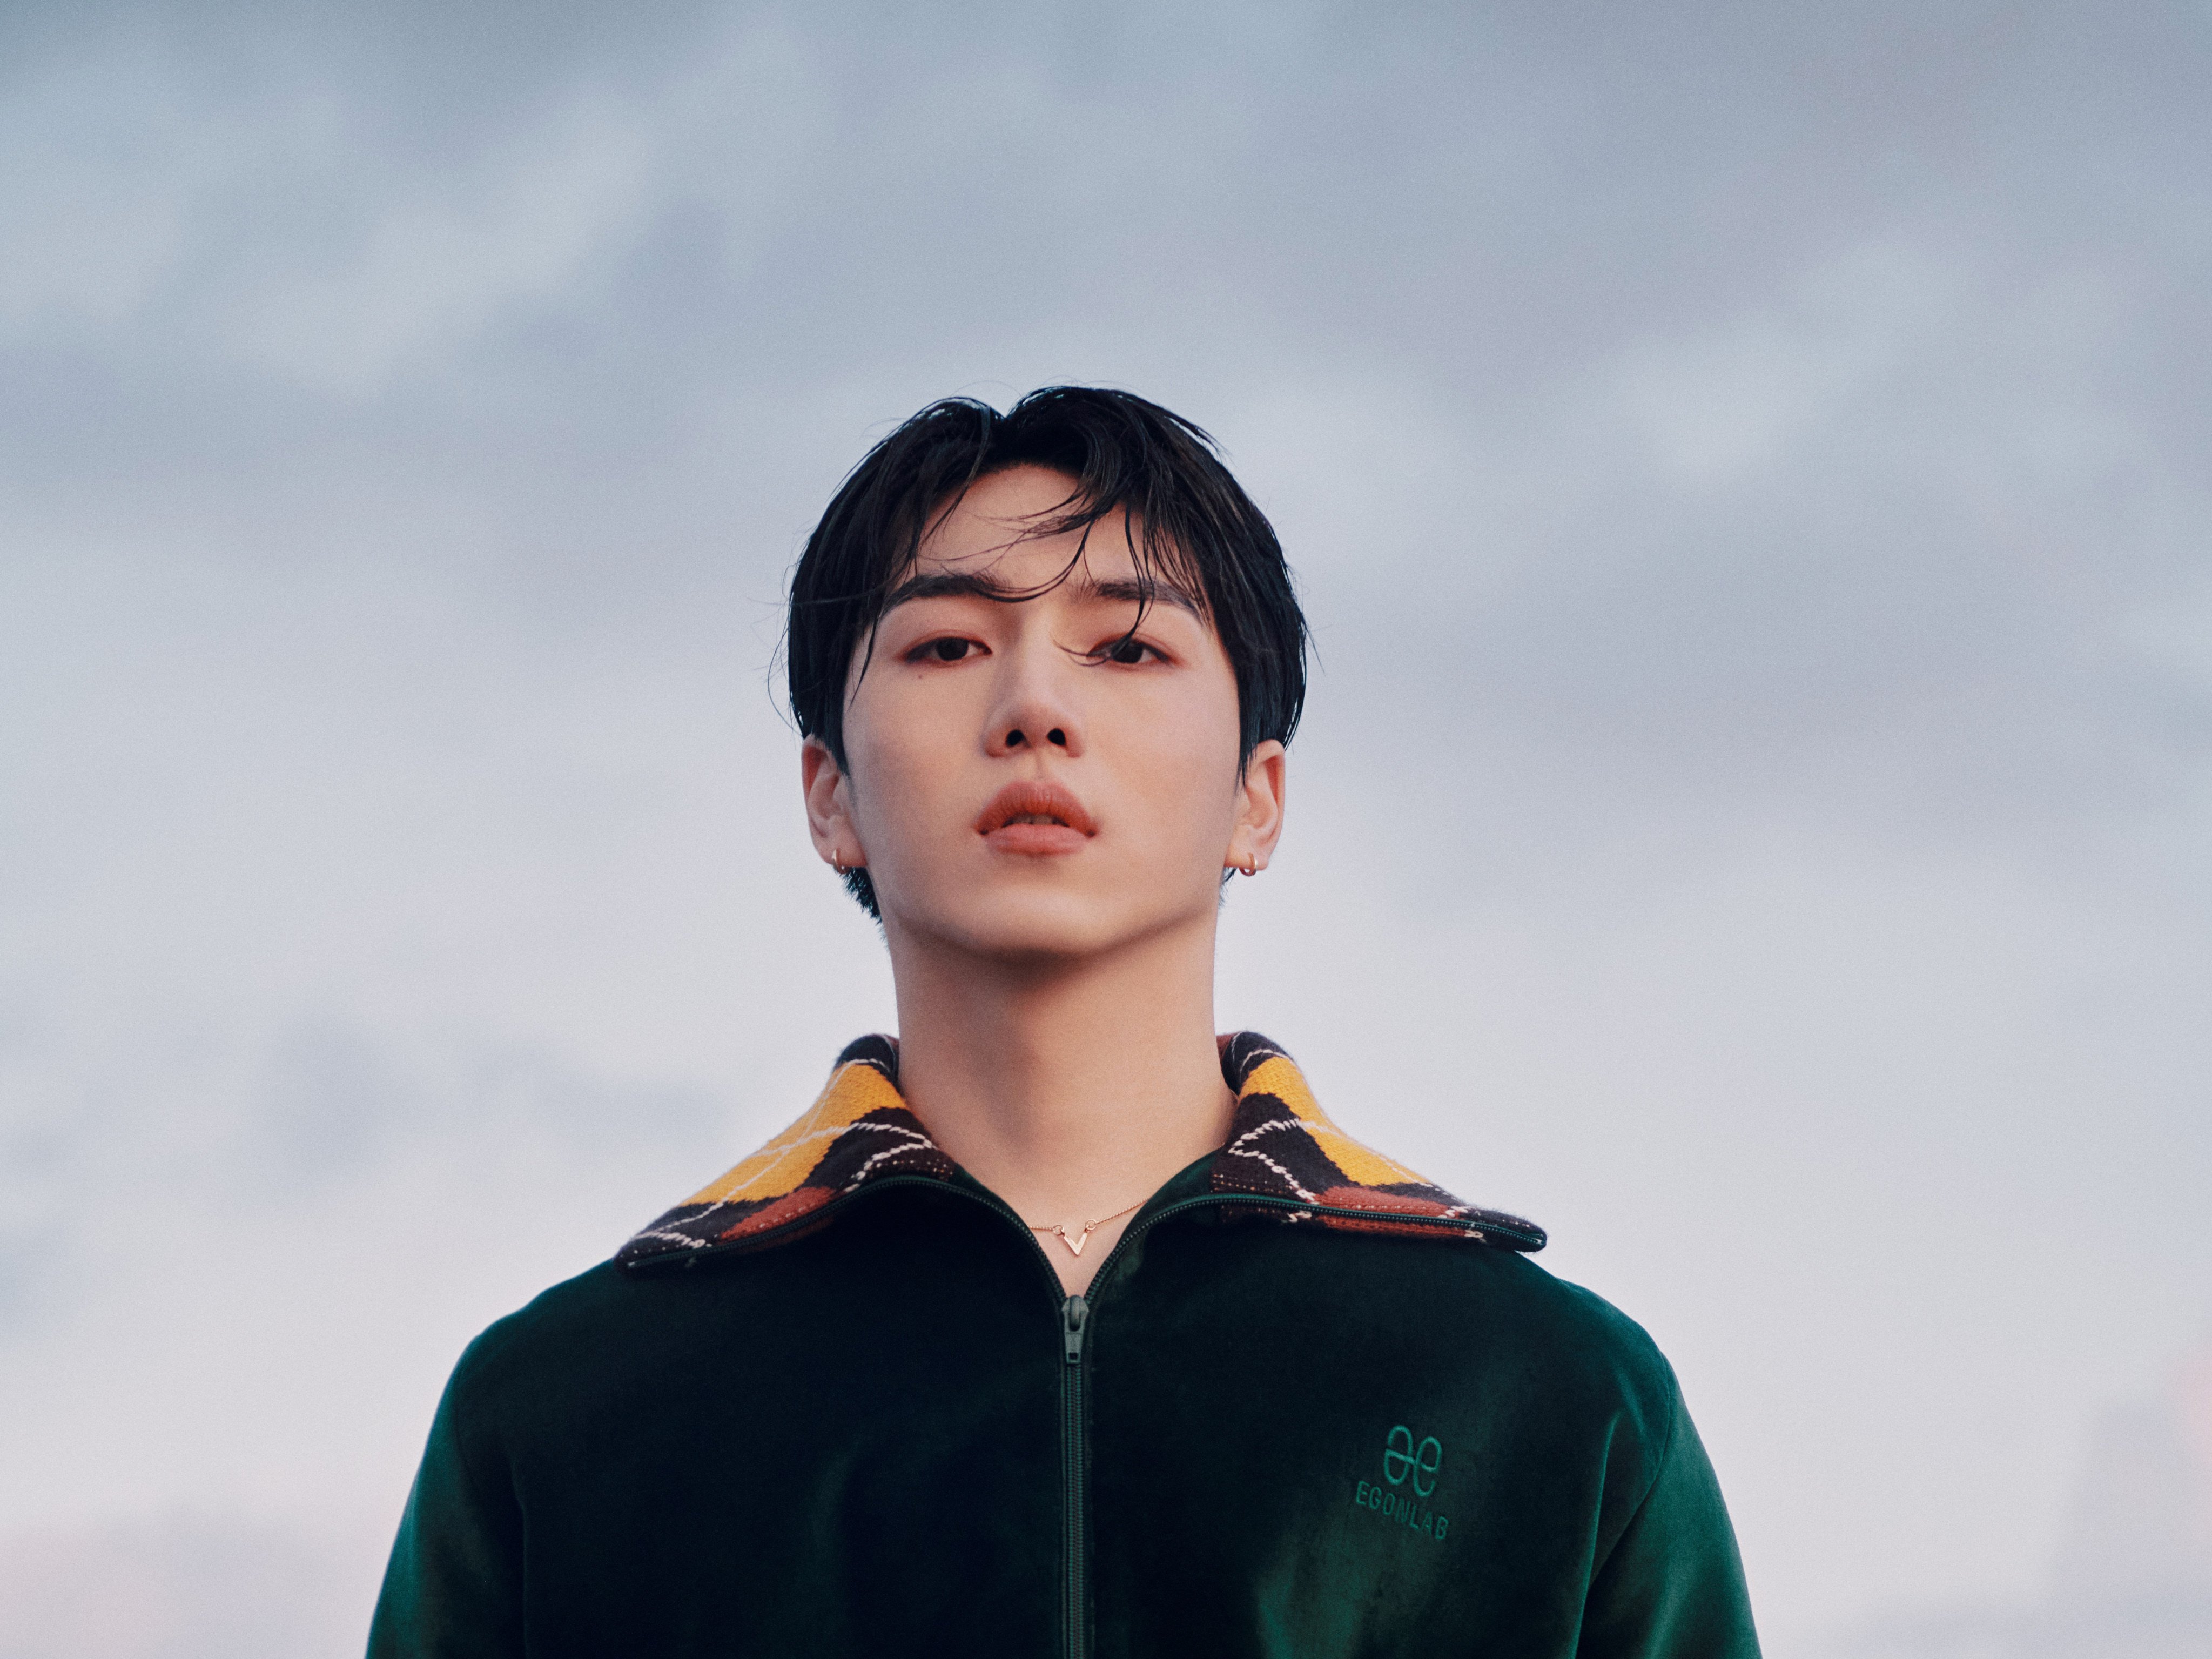 K-pop star Kino, 26, has been in the South Korean music industry since he was 12. He talks about going solo after boy band Pentagon’s break-up, training, and his new album. Photo: courtesy of Naked 